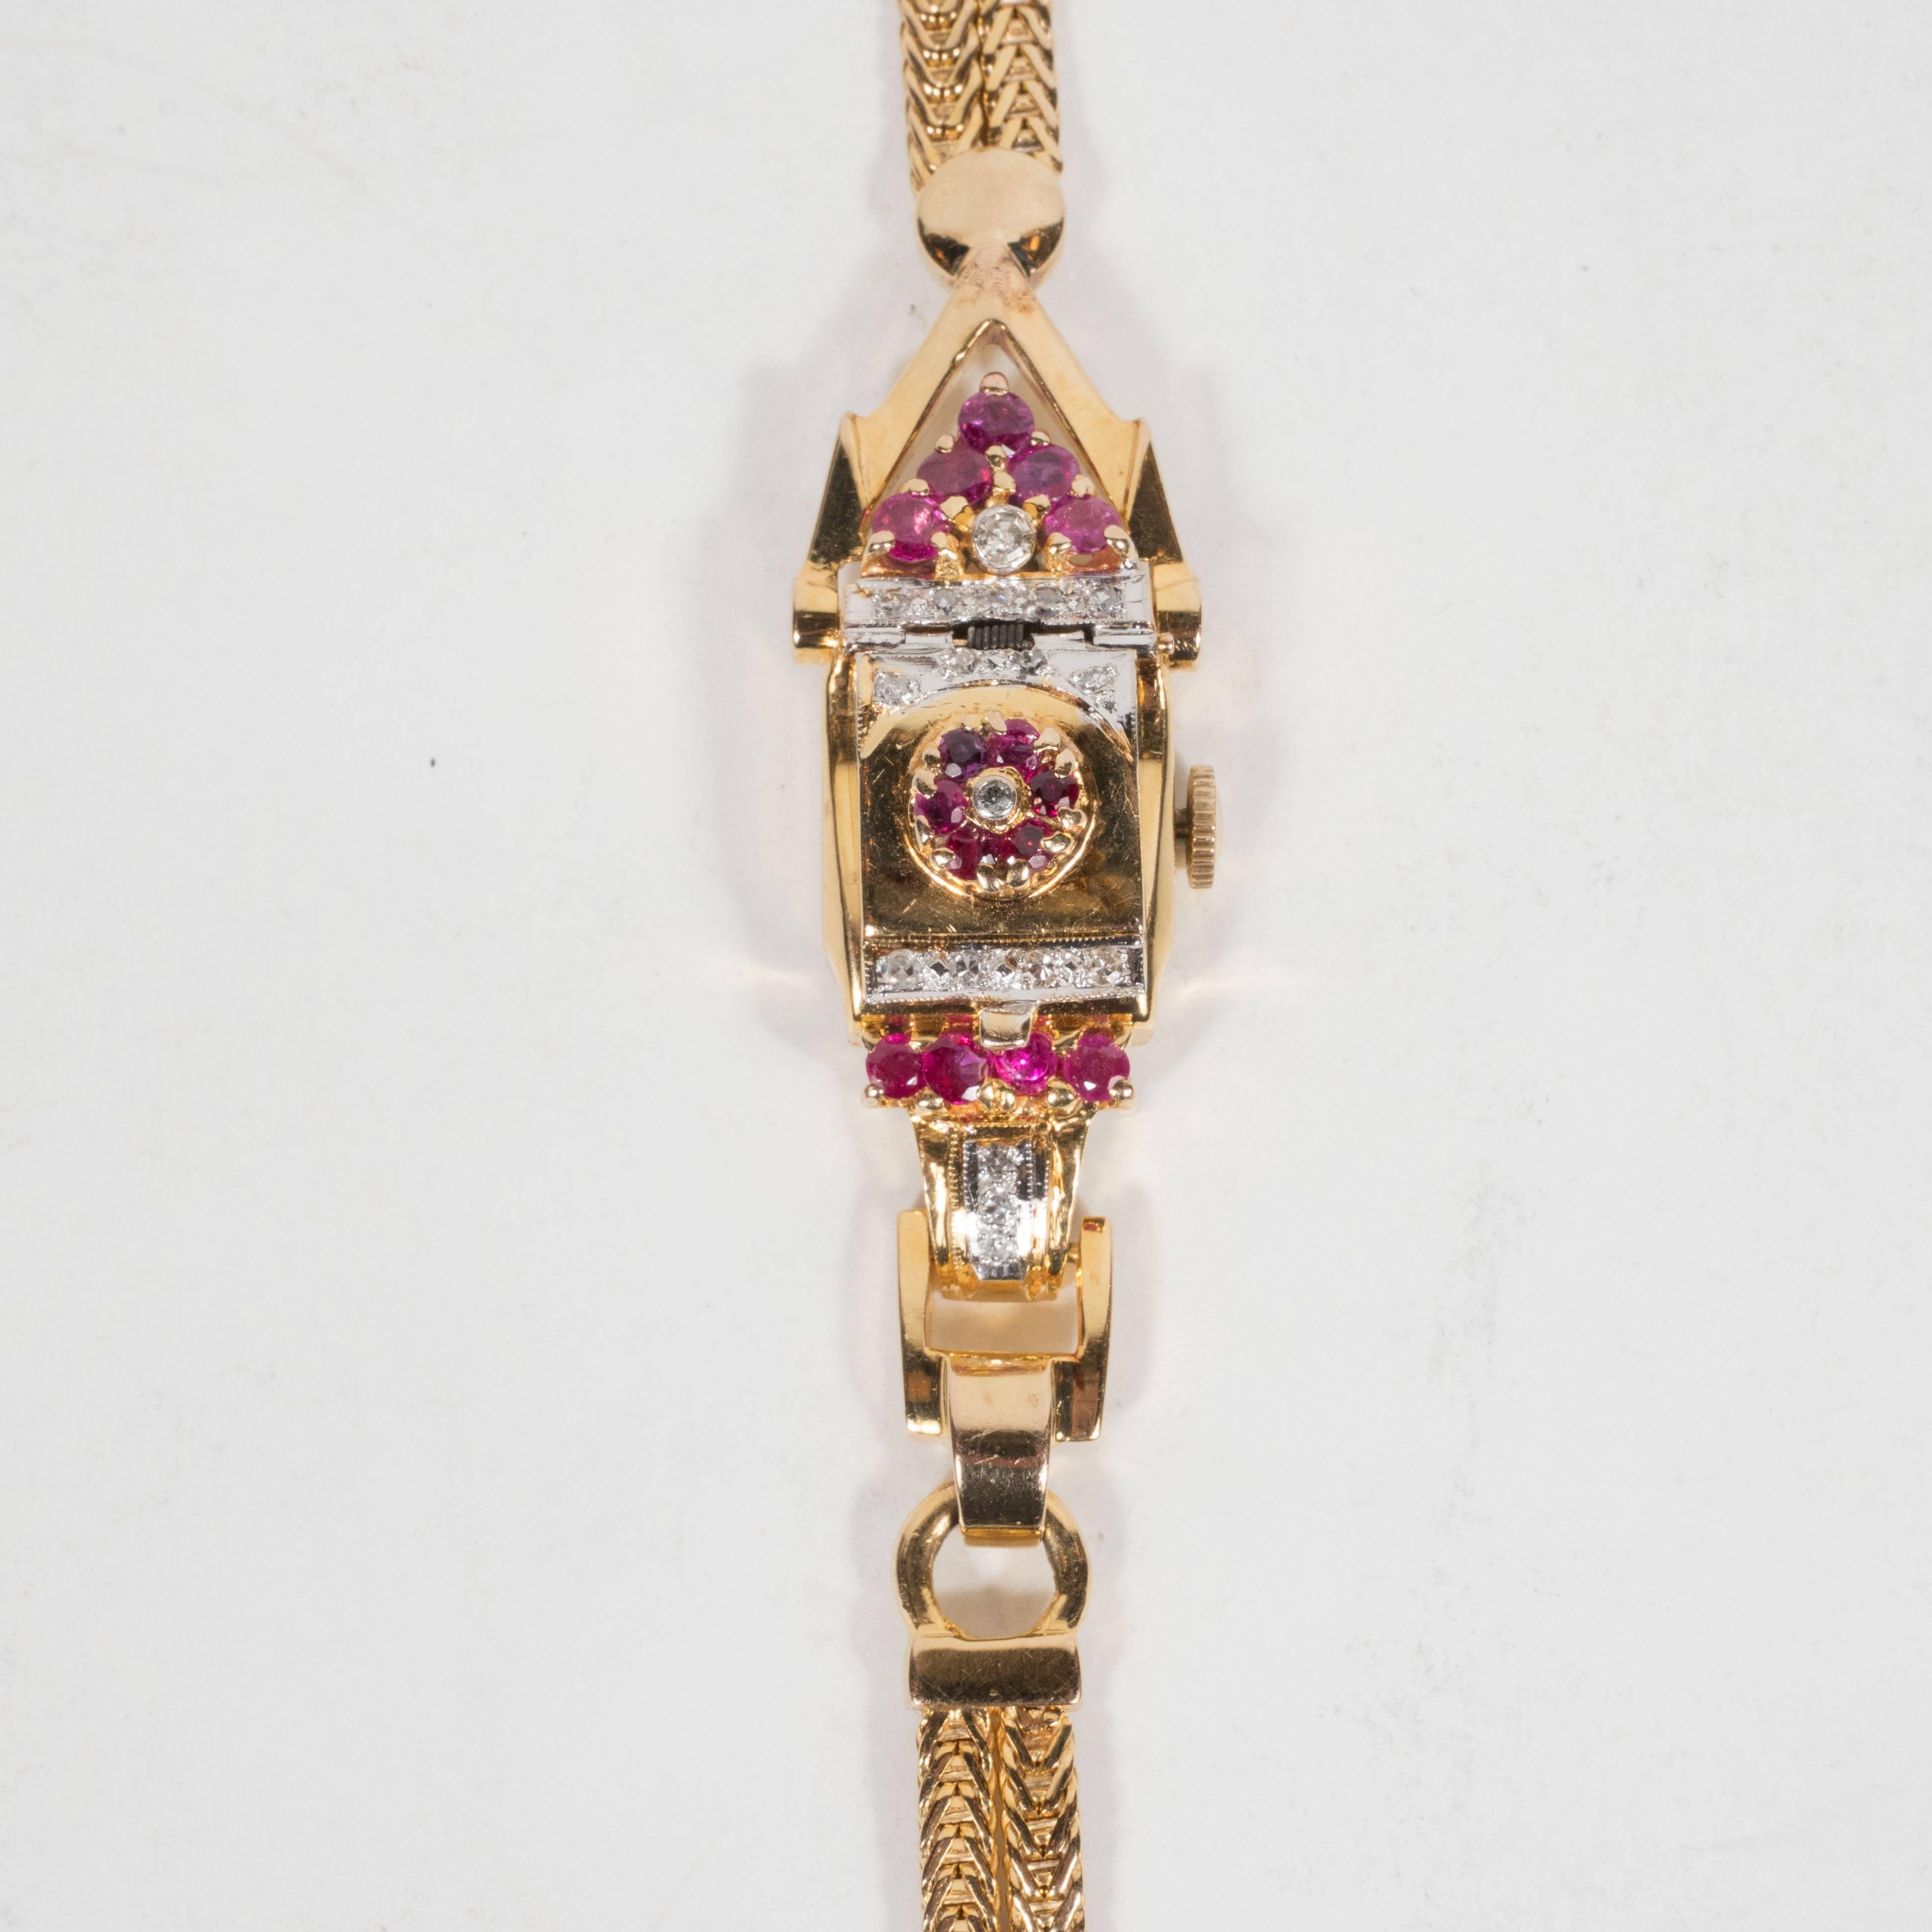 This elegant rose gold and platinum retro wrist watch by Lente features a full karat of rubies and a half karat of brilliant white diamonds. The face is covered by a gold flap with a tulip shaped ornament in the center composed of carnelian red